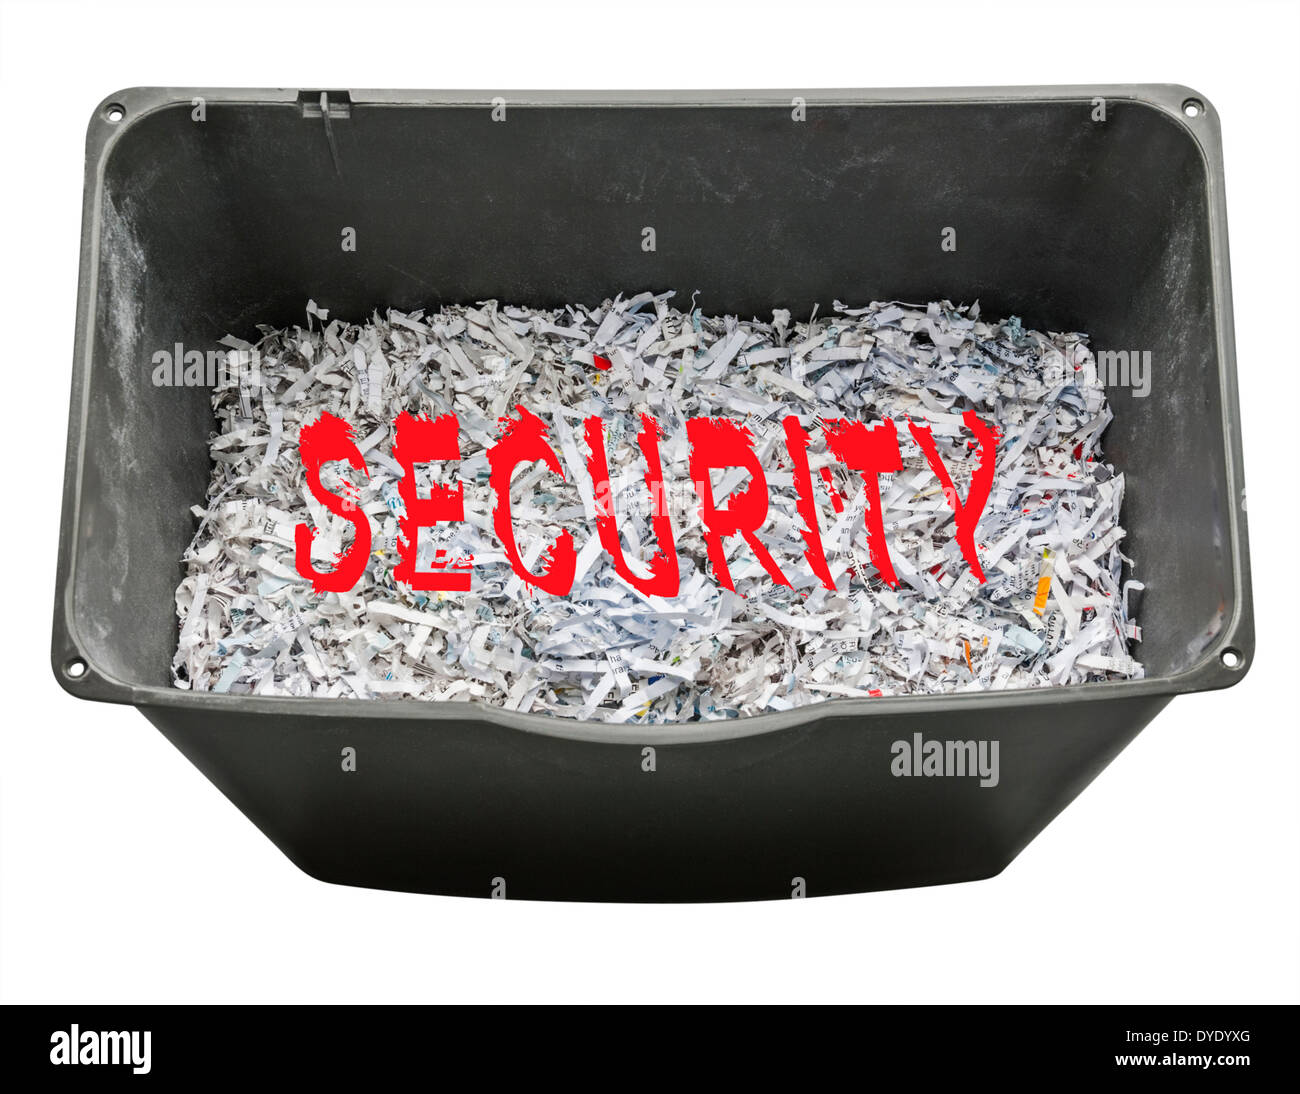 Shredded confidential papers for security reasons, isolated Stock Photo